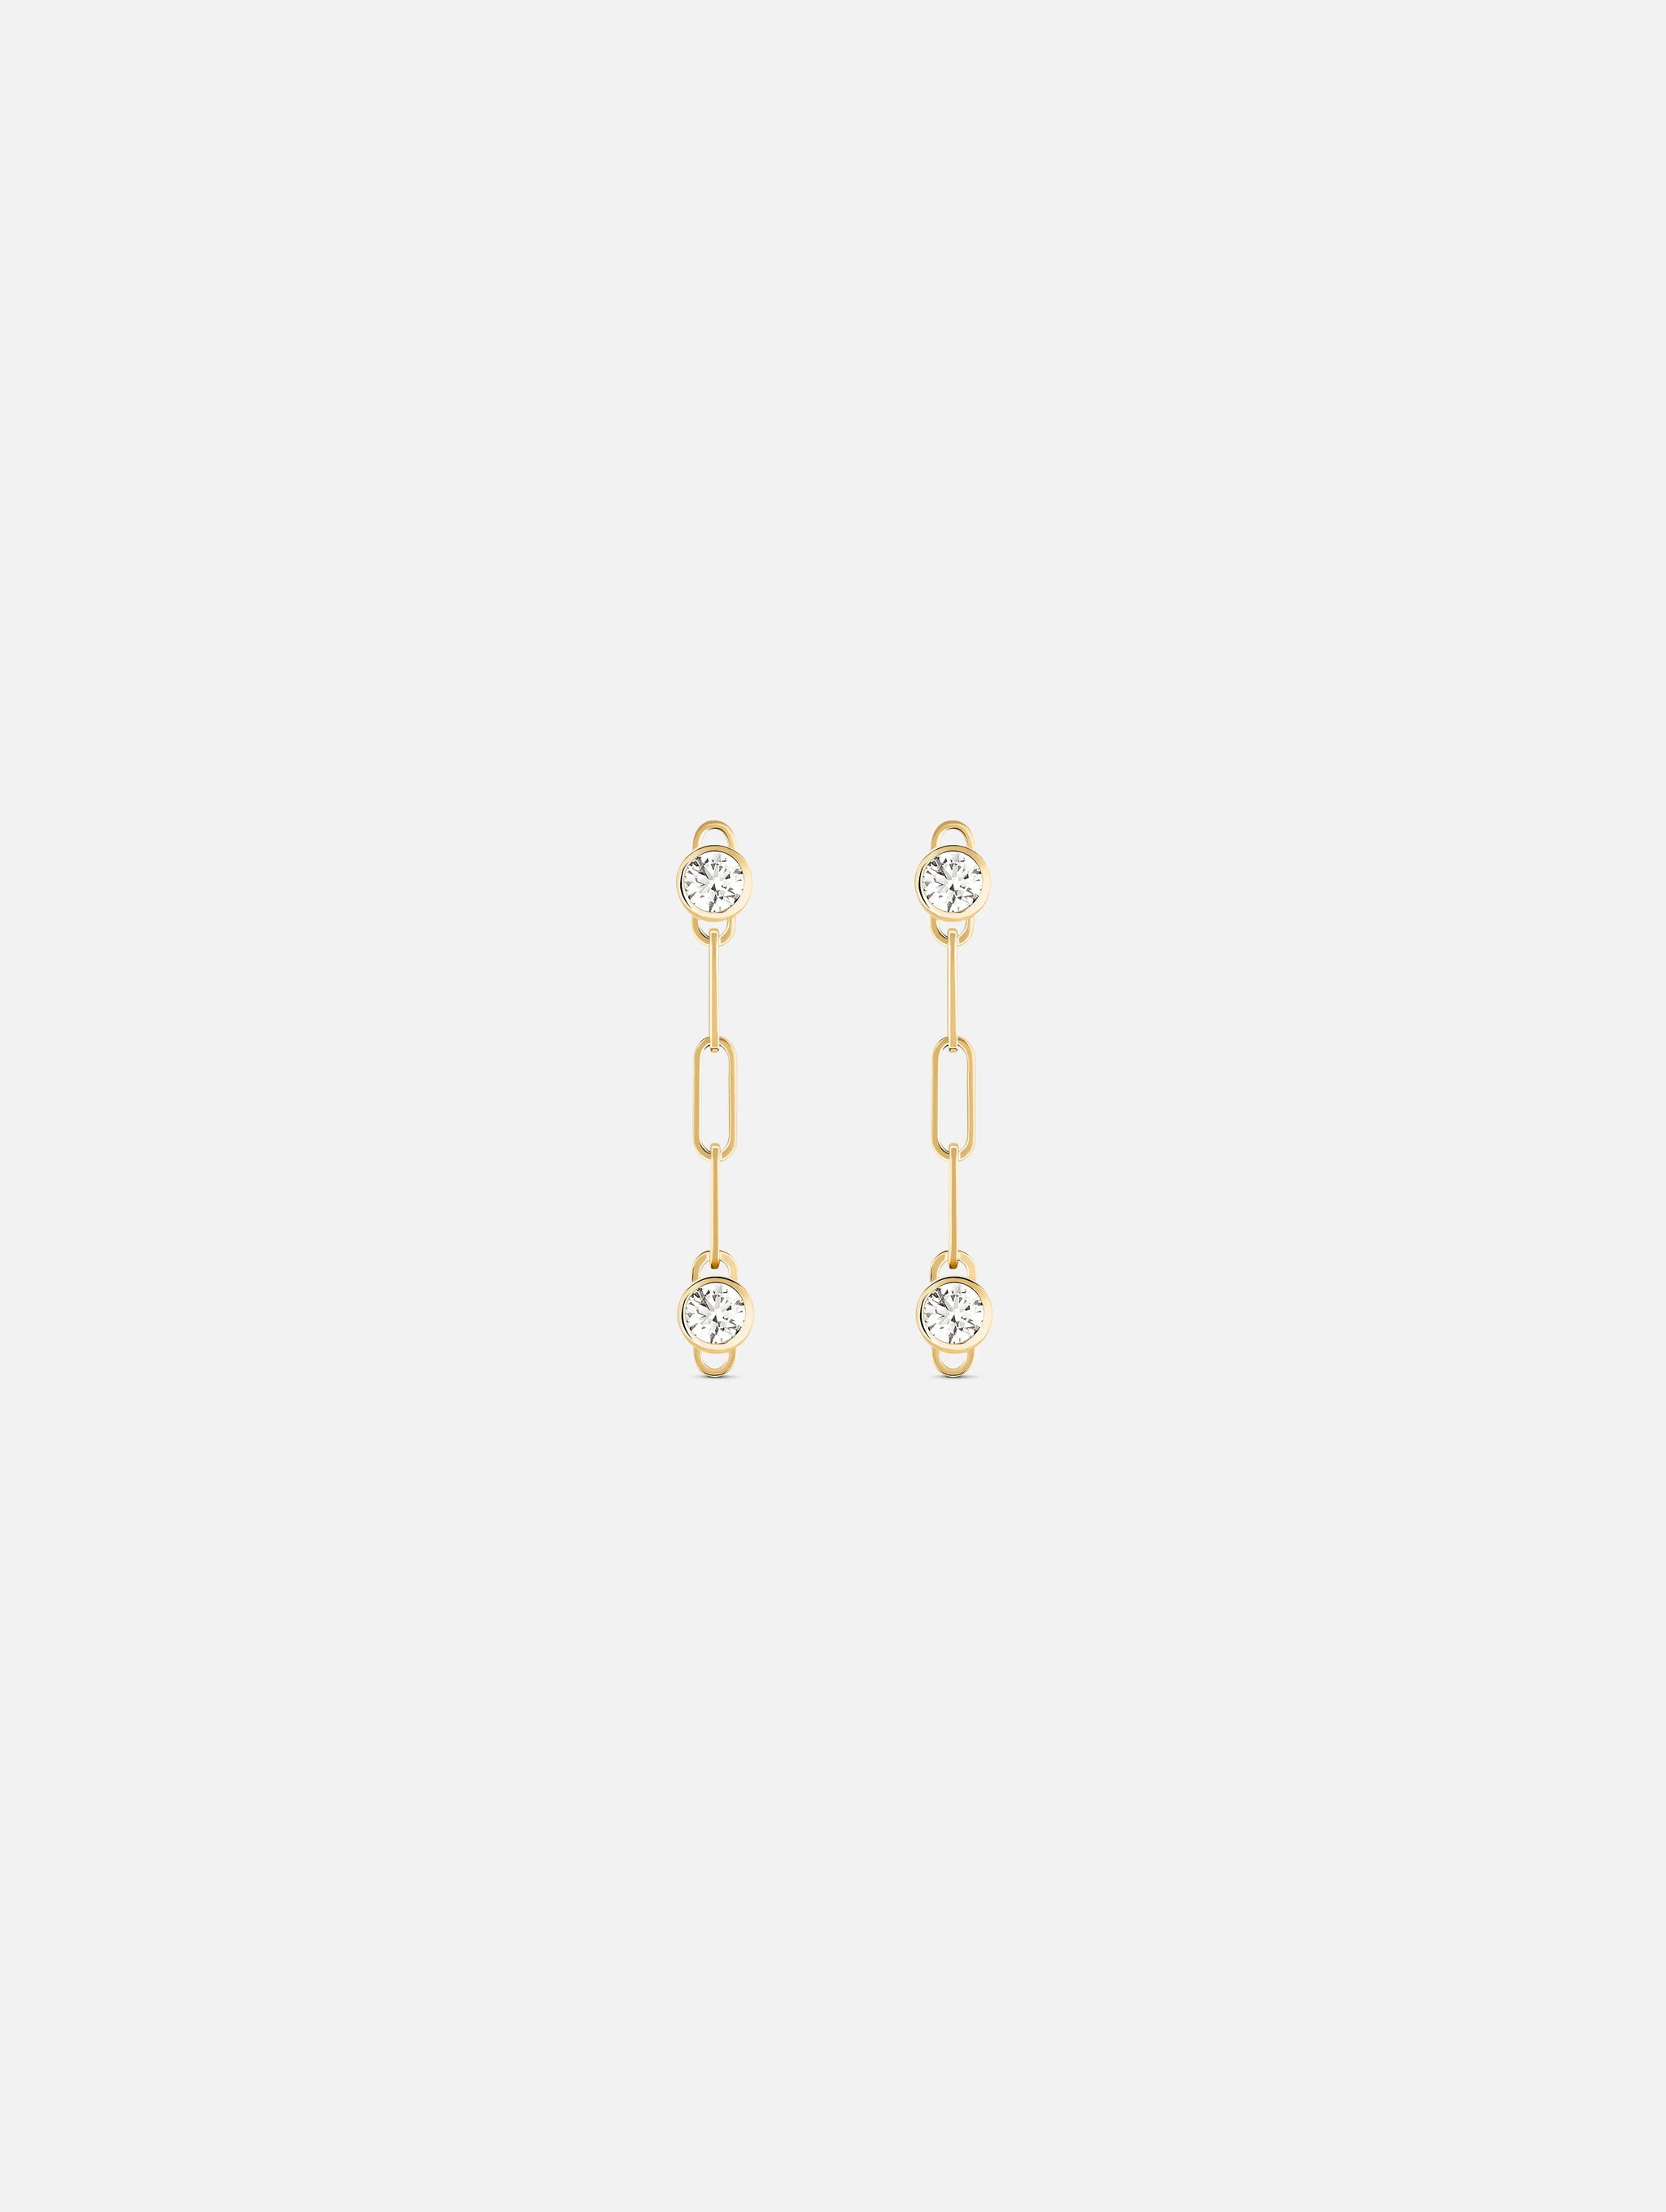 Round Duo PM Classics Earrings in Yellow Gold - 1 - Nouvel Heritage